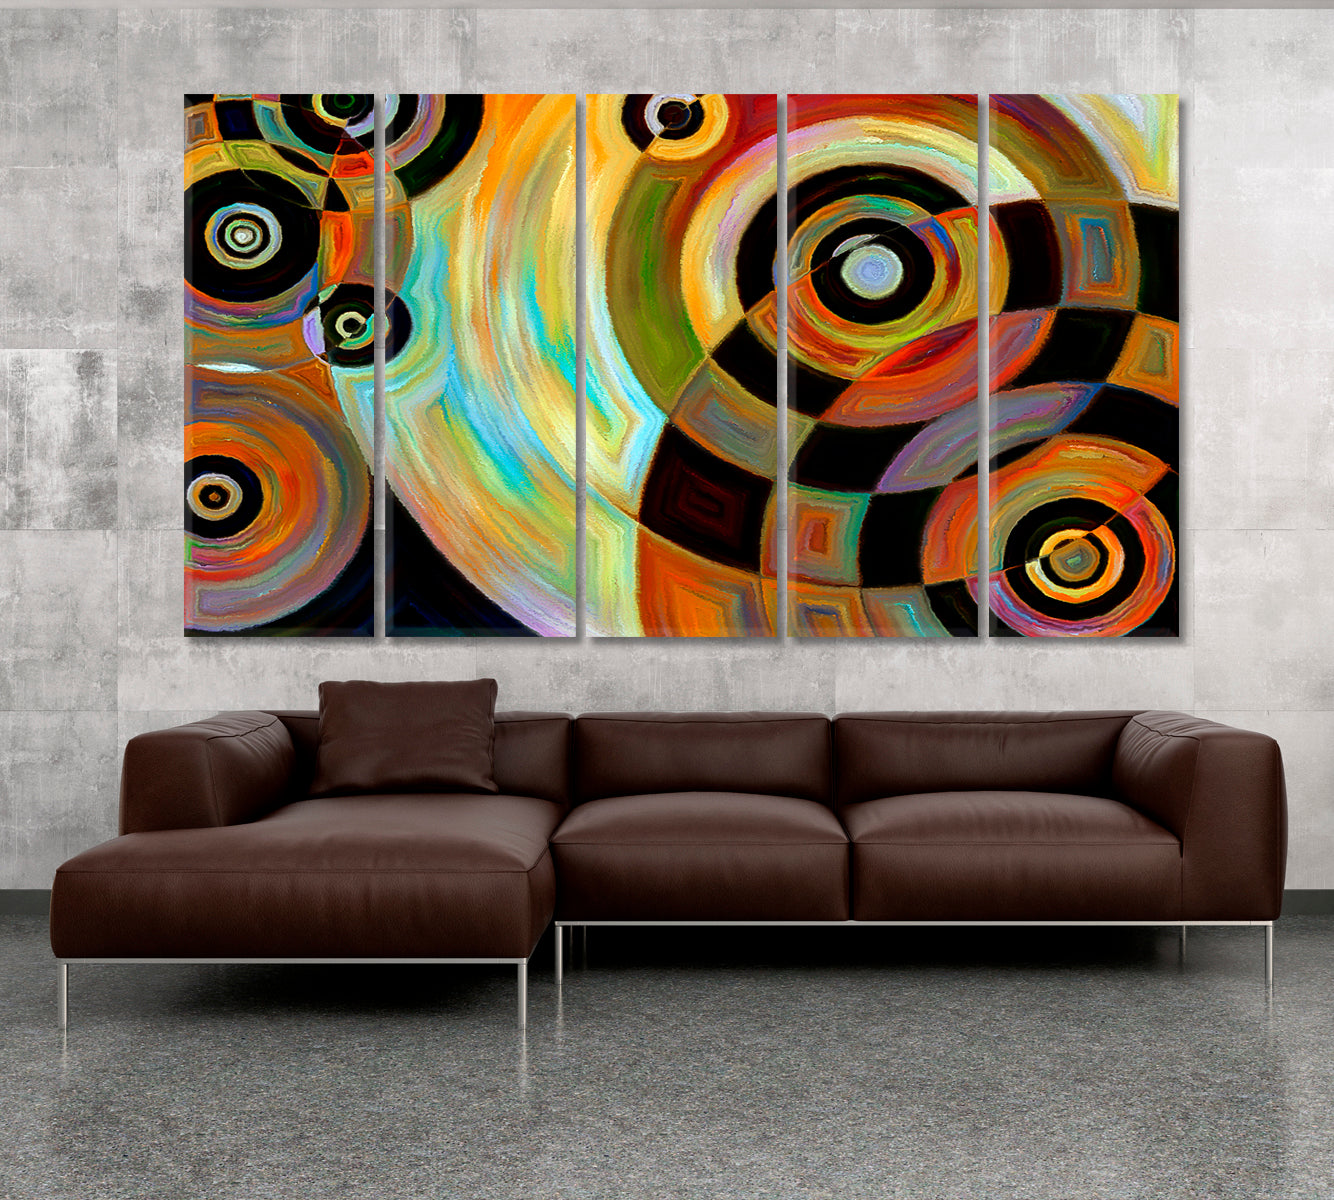 Vivid Abstraction Lines Shapes and Color Patterns Abstract Art Print Artesty 5 panels 36" x 24" 